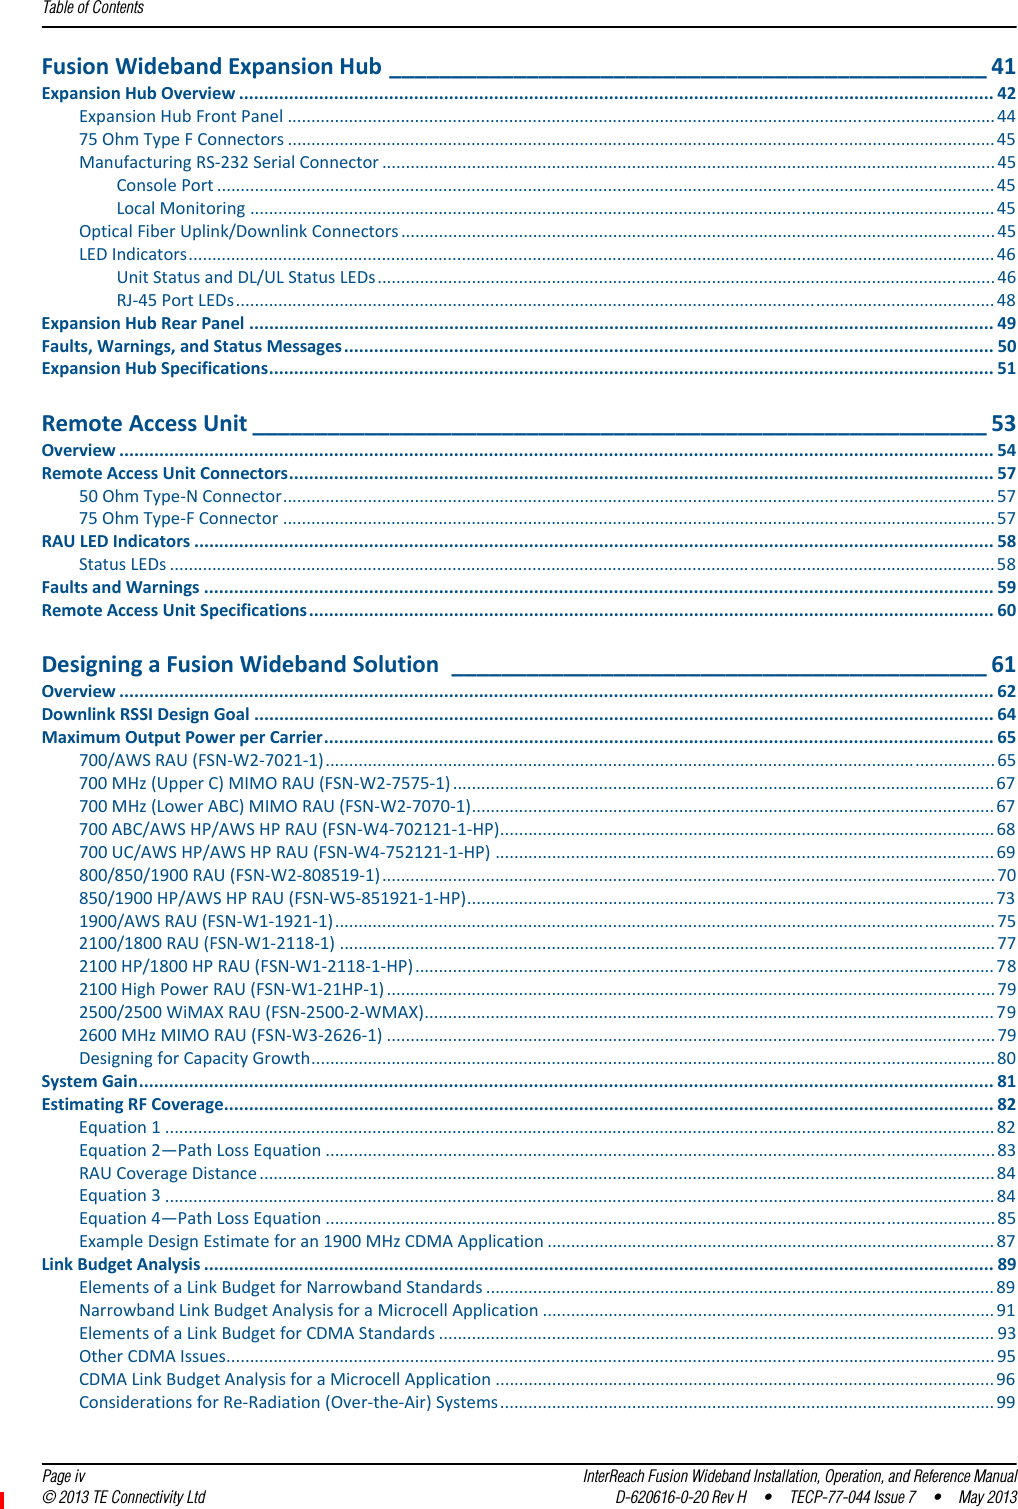 Table of Contents  Page iv InterReach Fusion Wideband Installation, Operation, and Reference Manual© 2013 TE Connectivity Ltd D-620616-0-20 Rev H  •  TECP-77-044 Issue 7  •  May 2013FusionWidebandExpansionHub ________________________________________________ 41ExpansionHubOverview ....................................................................................................................................................... 42ExpansionHubFrontPanel ......................................................................................................................................................4475OhmTypeFConnectors ......................................................................................................................................................45ManufacturingRS‐232SerialConnector ..................................................................................................................................45ConsolePort ..................................................................................................................................................................... 45LocalMonitoring .............................................................................................................................................................. 45OpticalFiberUplink/DownlinkConnectors .............................................................................................................................. 45LEDIndicators........................................................................................................................................................................... 46UnitStatusandDL/ULStatusLEDs................................................................................................................................... 46RJ‐45PortLEDs ................................................................................................................................................................. 48ExpansionHubRearPanel ..................................................................................................................................................... 49Faults,Warnings,andStatusMessages.................................................................................................................................. 50ExpansionHubSpecifications................................................................................................................................................. 51RemoteAccessUnit ___________________________________________________________ 53Overview ............................................................................................................................................................................... 54RemoteAccessUnitConnectors............................................................................................................................................. 5750OhmType‐NConnector....................................................................................................................................................... 5775OhmType‐FConnector ....................................................................................................................................................... 57RAULEDIndicators ................................................................................................................................................................ 58StatusLEDs ............................................................................................................................................................................... 58FaultsandWarnings .............................................................................................................................................................. 59RemoteAccessUnitSpecifications......................................................................................................................................... 60DesigningaFusionWidebandSolution ___________________________________________ 61Overview ............................................................................................................................................................................... 62DownlinkRSSIDesignGoal .................................................................................................................................................... 64MaximumOutputPowerperCarrier...................................................................................................................................... 65700/AWSRAU(FSN‐W2‐7021‐1)..............................................................................................................................................65700MHz(UpperC)MIMORAU(FSN‐W2‐7575‐1) ................................................................................................................... 67700MHz(LowerABC)MIMORAU(FSN‐W2‐7070‐1)............................................................................................................... 67700ABC/AWSHP/AWSHPRAU(FSN‐W4‐702121‐1‐HP)......................................................................................................... 68700UC/AWSHP/AWSHPRAU(FSN‐W4‐752121‐1‐HP) .......................................................................................................... 69800/850/1900RAU(FSN‐W2‐808519‐1).................................................................................................................................. 70850/1900HP/AWSHPRAU(FSN‐W5‐851921‐1‐HP)................................................................................................................ 731900/AWSRAU(FSN‐W1‐1921‐1)............................................................................................................................................ 752100/1800RAU(FSN‐W1‐2118‐1) ........................................................................................................................................... 772100HP/1800HPRAU(FSN‐W1‐2118‐1‐HP)........................................................................................................................... 782100HighPowerRAU(FSN‐W1‐21HP‐1) ................................................................................................................................. 792500/2500WiMAXRAU(FSN‐2500‐2‐WMAX)......................................................................................................................... 792600MHzMIMORAU(FSN‐W3‐2626‐1) ................................................................................................................................. 79DesigningforCapacityGrowth................................................................................................................................................. 80SystemGain........................................................................................................................................................................... 81EstimatingRFCoverage.......................................................................................................................................................... 82Equation1................................................................................................................................................................................ 82Equation2—PathLossEquation ..............................................................................................................................................83RAUCoverageDistance ............................................................................................................................................................ 84Equation3................................................................................................................................................................................ 84Equation4—PathLossEquation ..............................................................................................................................................85ExampleDesignEstimateforan1900MHzCDMAApplication ............................................................................................... 87LinkBudgetAnalysis .............................................................................................................................................................. 89ElementsofaLinkBudgetforNarrowbandStandards ............................................................................................................ 89NarrowbandLinkBudgetAnalysisforaMicrocellApplication ................................................................................................ 91ElementsofaLinkBudgetforCDMAStandards ...................................................................................................................... 93OtherCDMAIssues................................................................................................................................................................... 95CDMALinkBudgetAnalysisforaMicrocellApplication .......................................................................................................... 96ConsiderationsforRe‐Radiation(Over‐the‐Air)Systems ......................................................................................................... 99